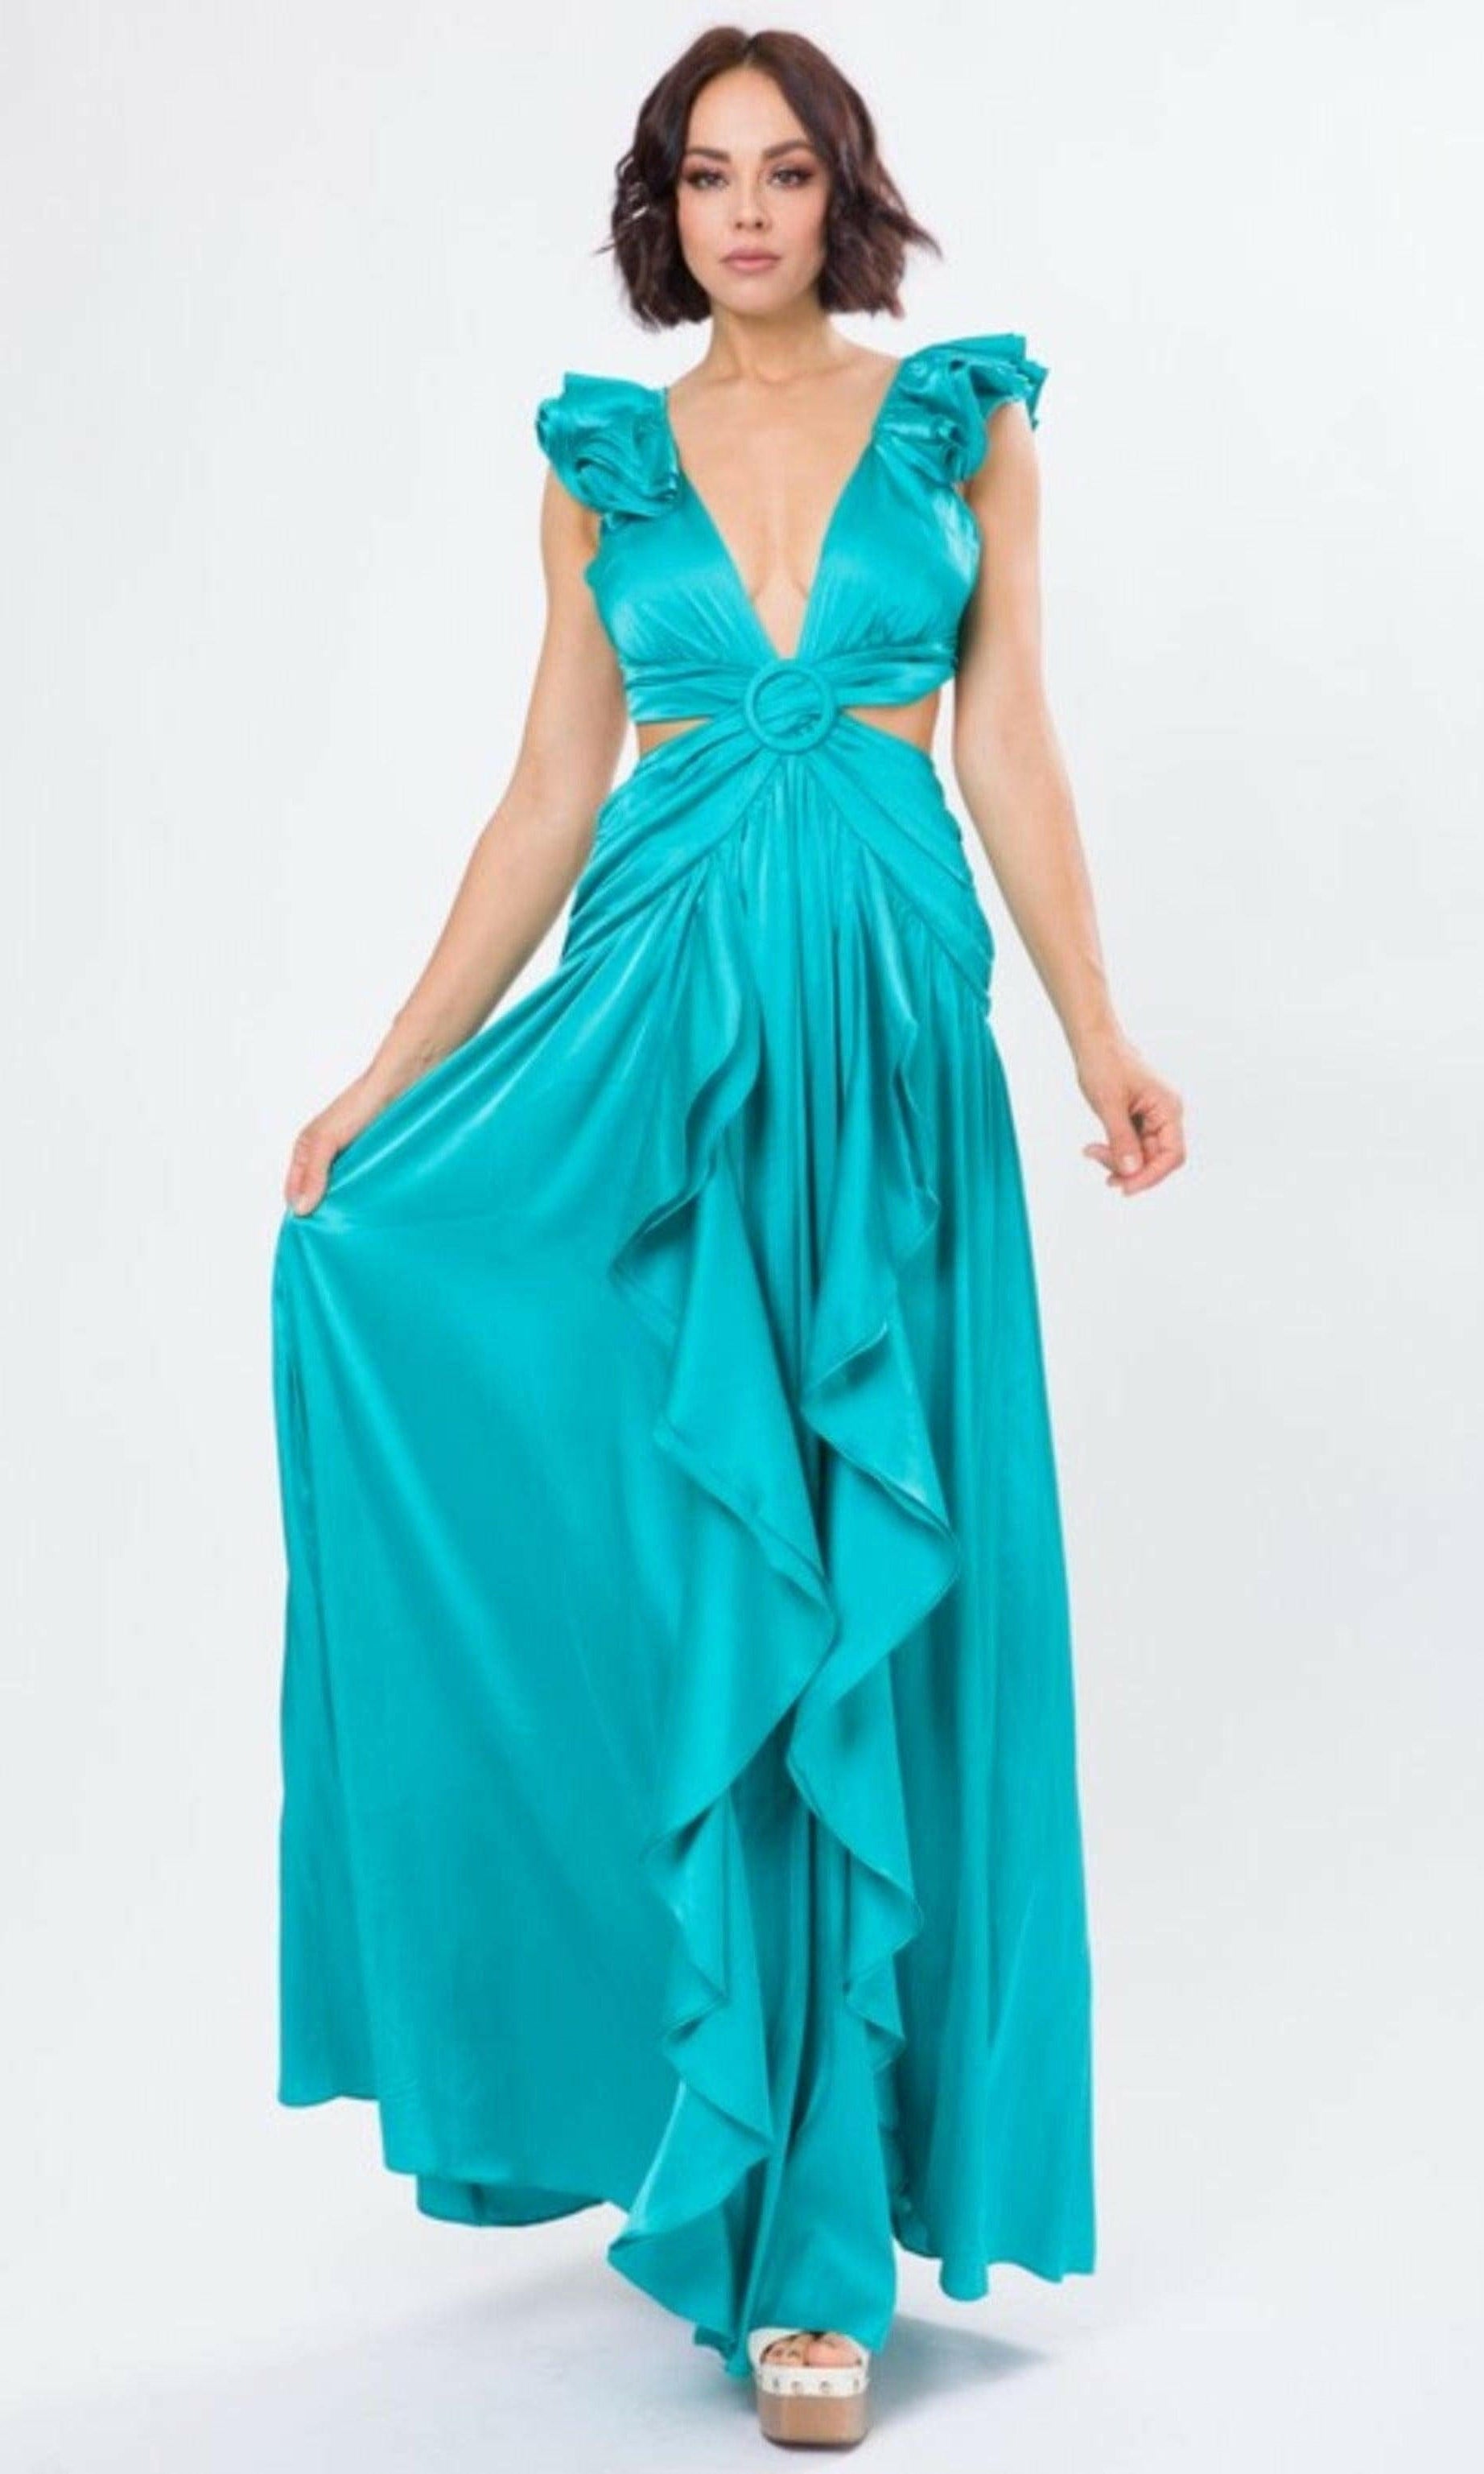 Epicplacess Dress SMALL / BLUE / UNITED STATES SOLID SATIN RUFFLE SLEEVE GOWN MAXI DRESS RVD2556